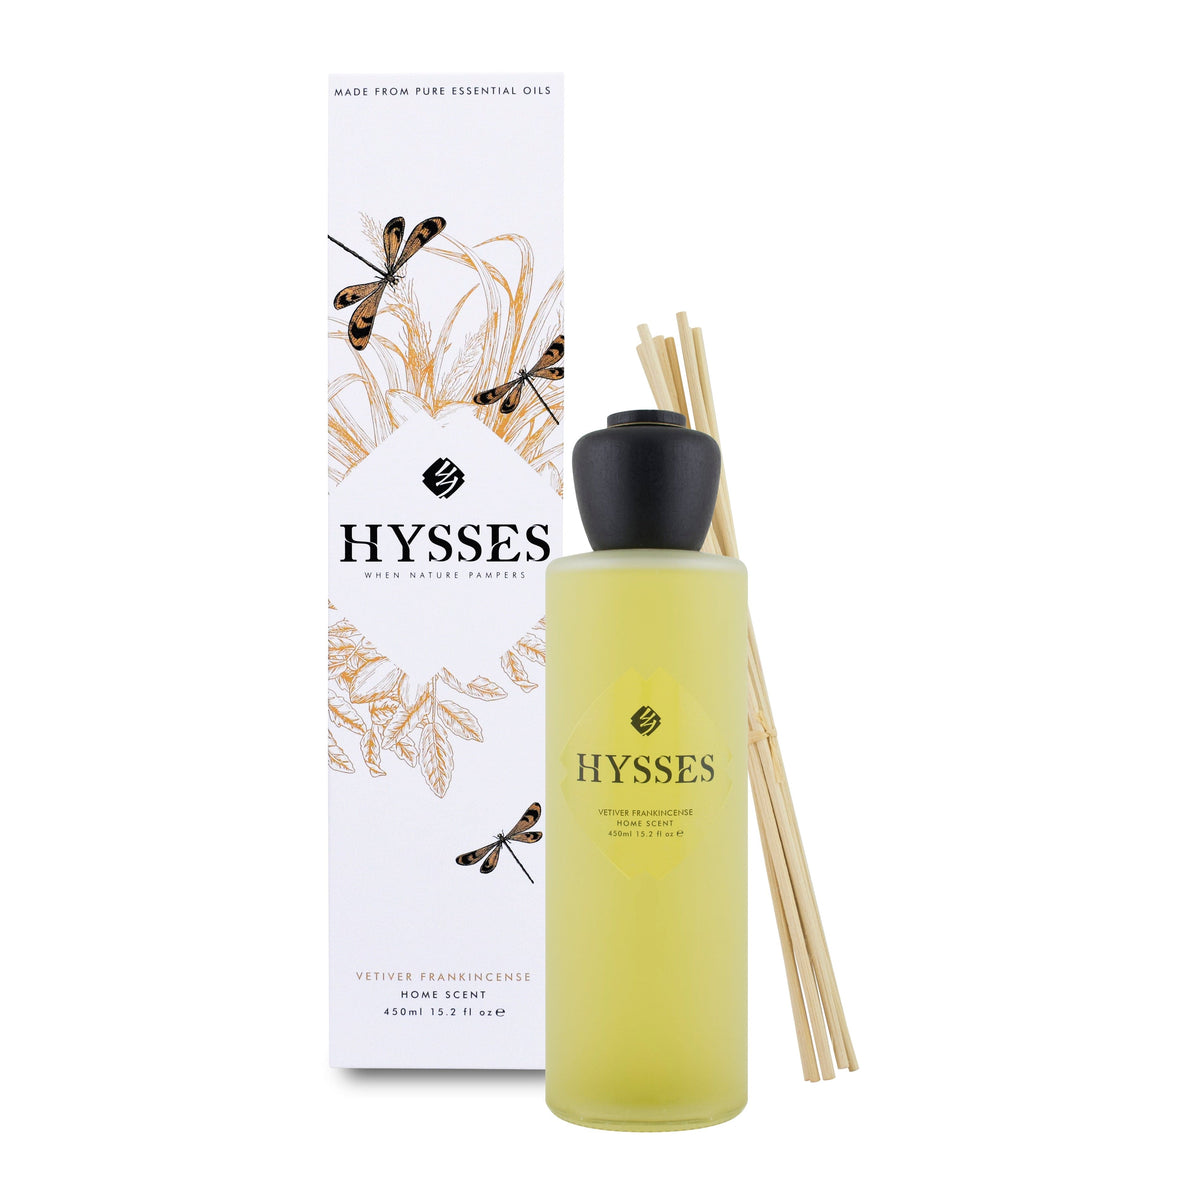 Hysses Home Scents 450ml Home Scent Reed Diffuser Vetiver Frankincense